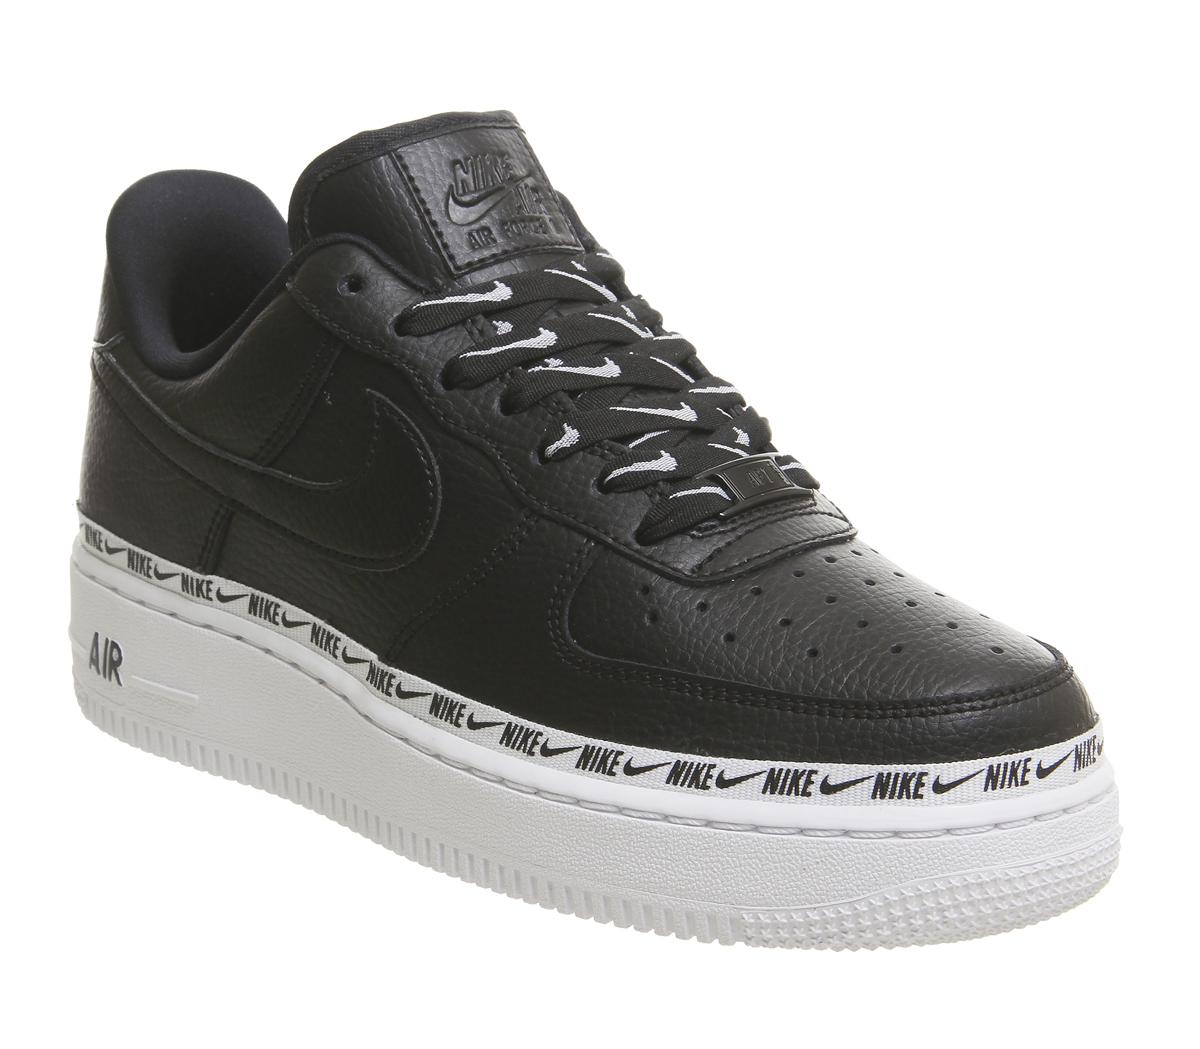 black & white air force 1 07 trainers